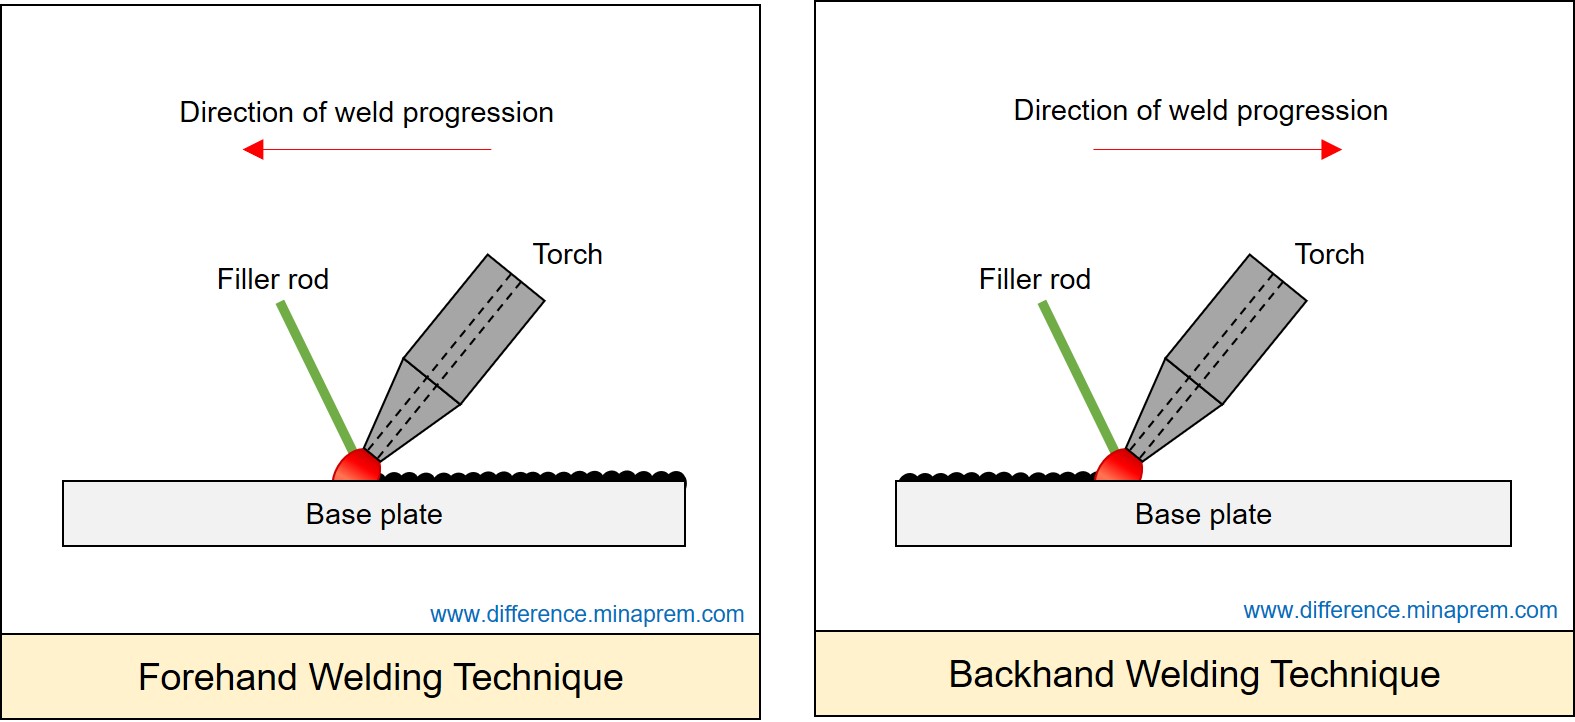 Schematic representation of forehand welding and backhand welding